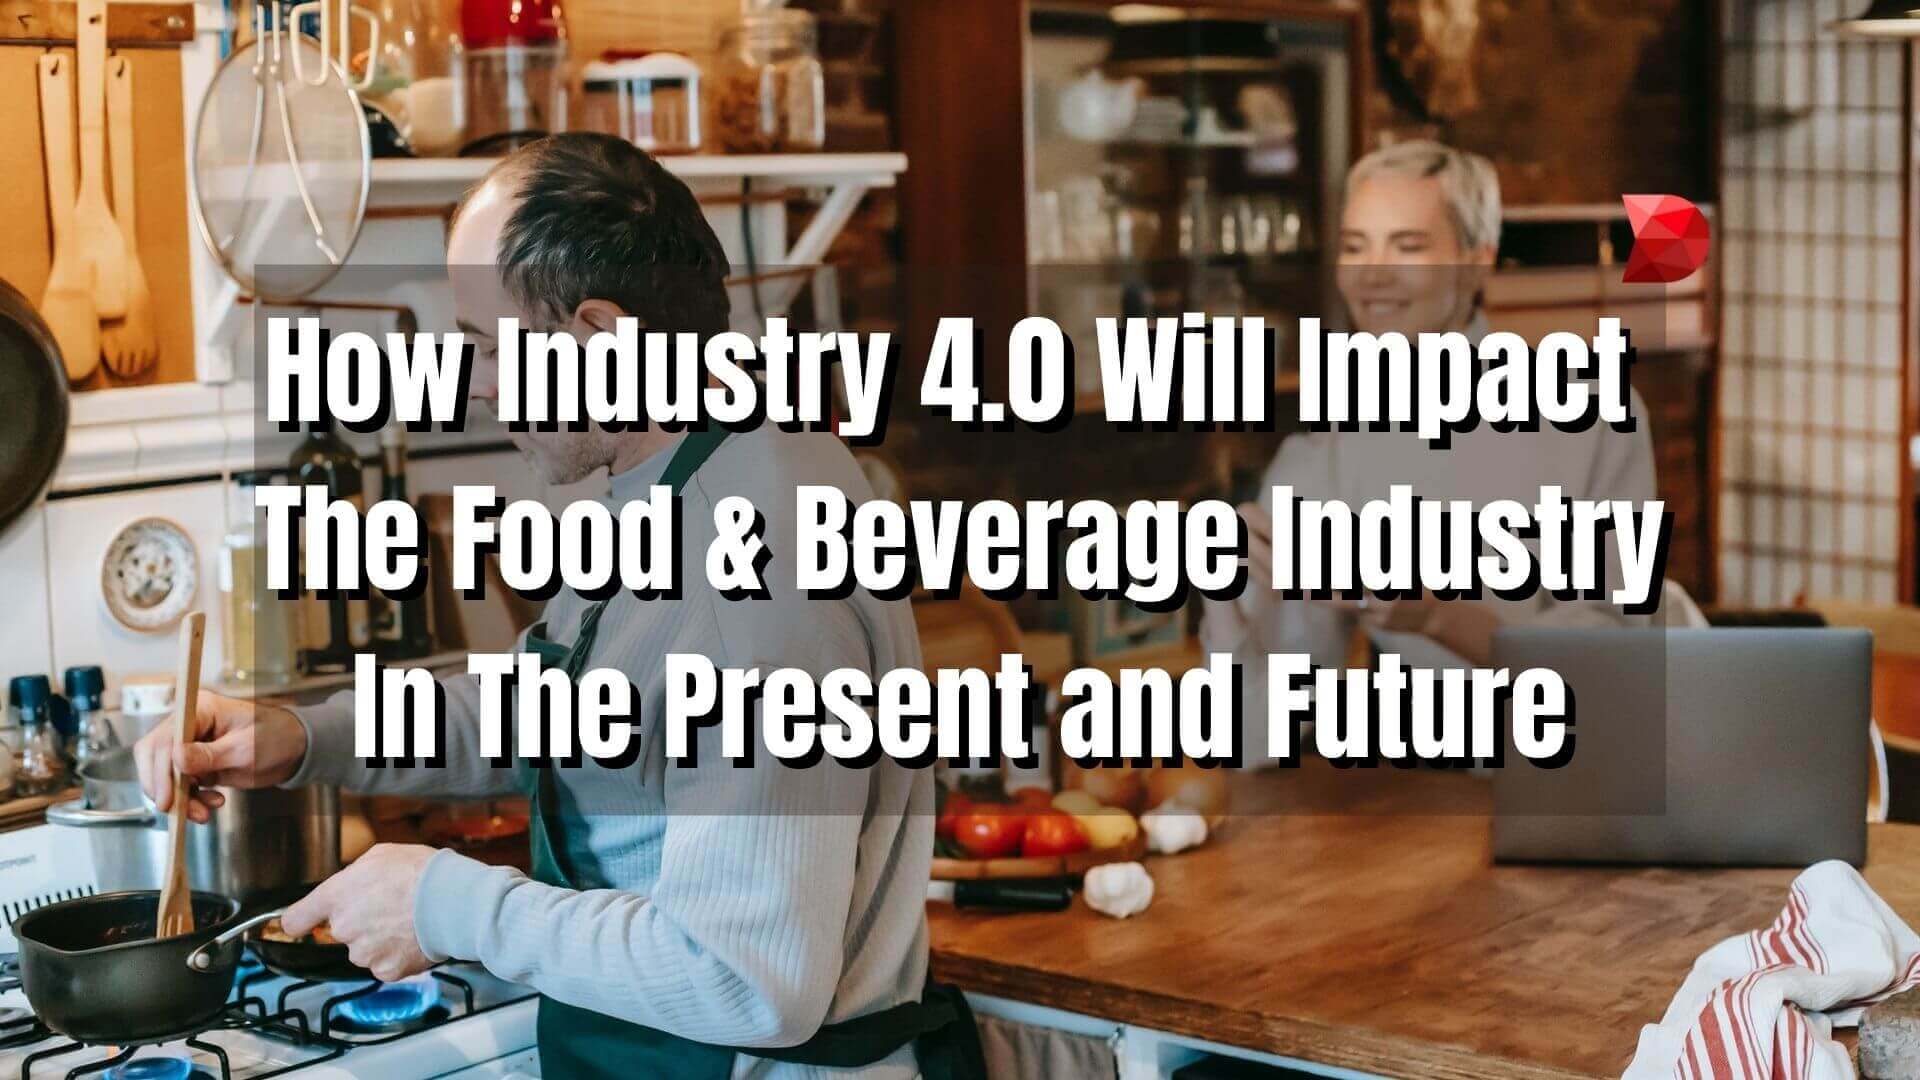 How Industry 4.0 Will Impact The Food & Beverage Industry In The Present and Future